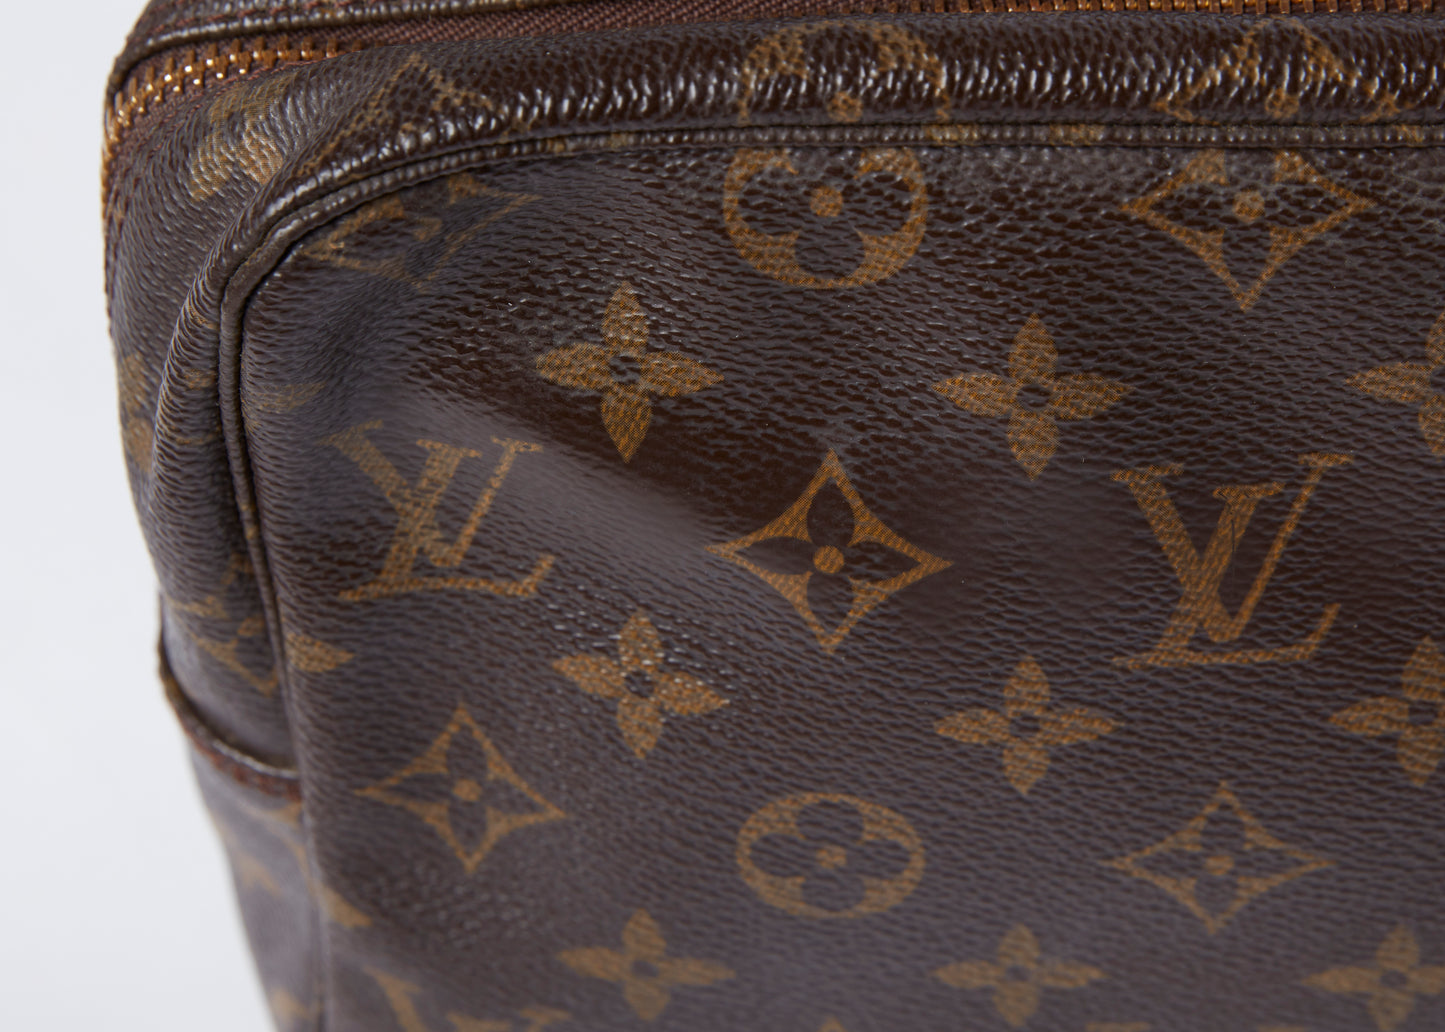 Louis Vuitton Trousse 28 Cosmetic/Toiletry Pouch